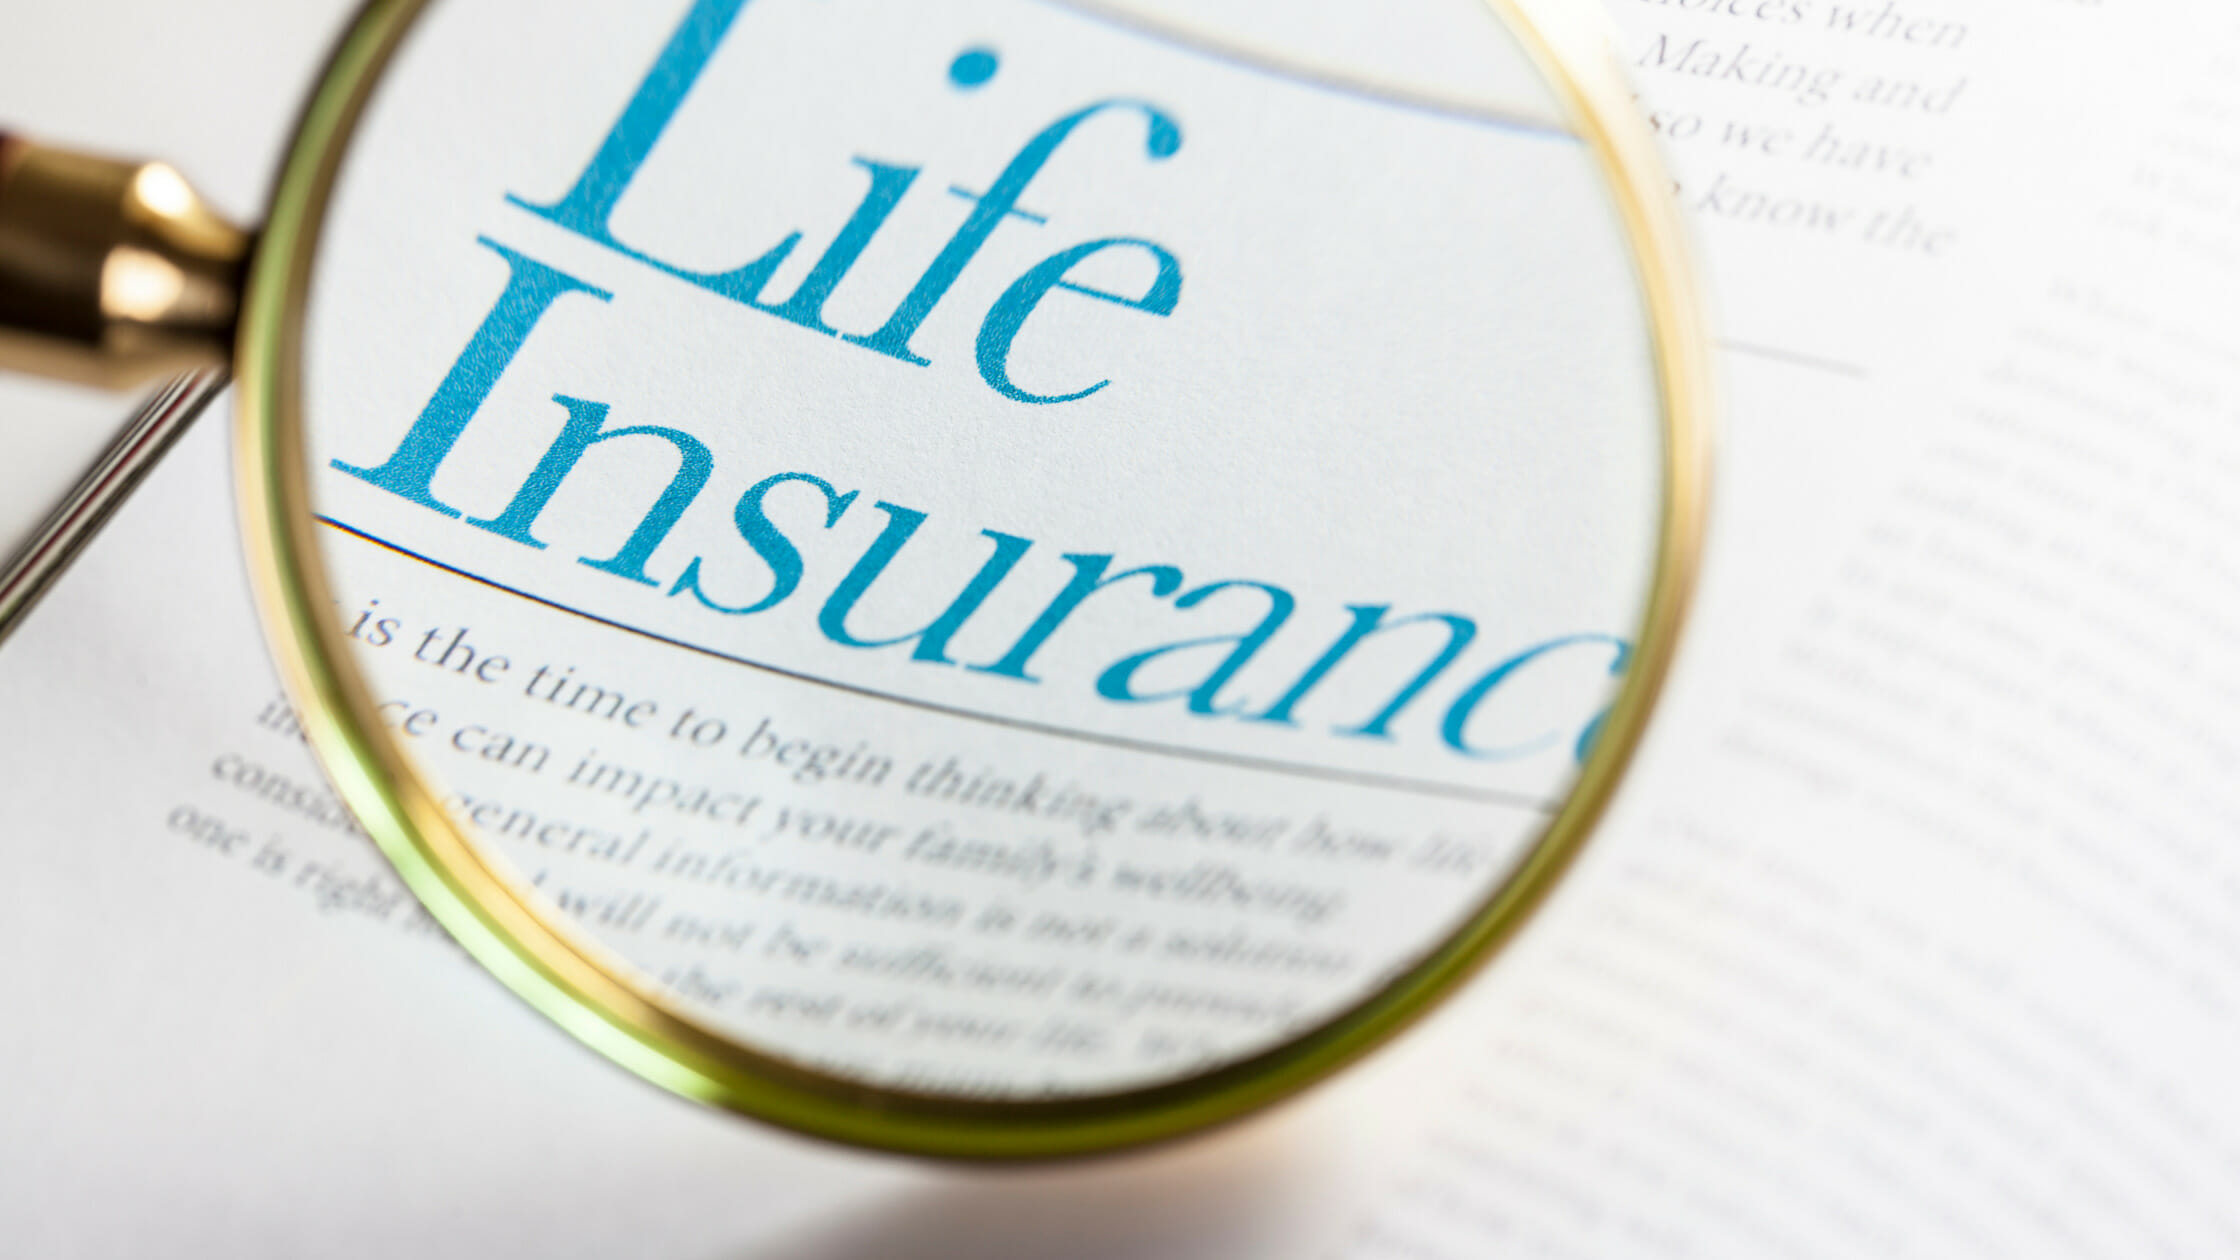 magnifying glass over the words "Life Insurance" on a document